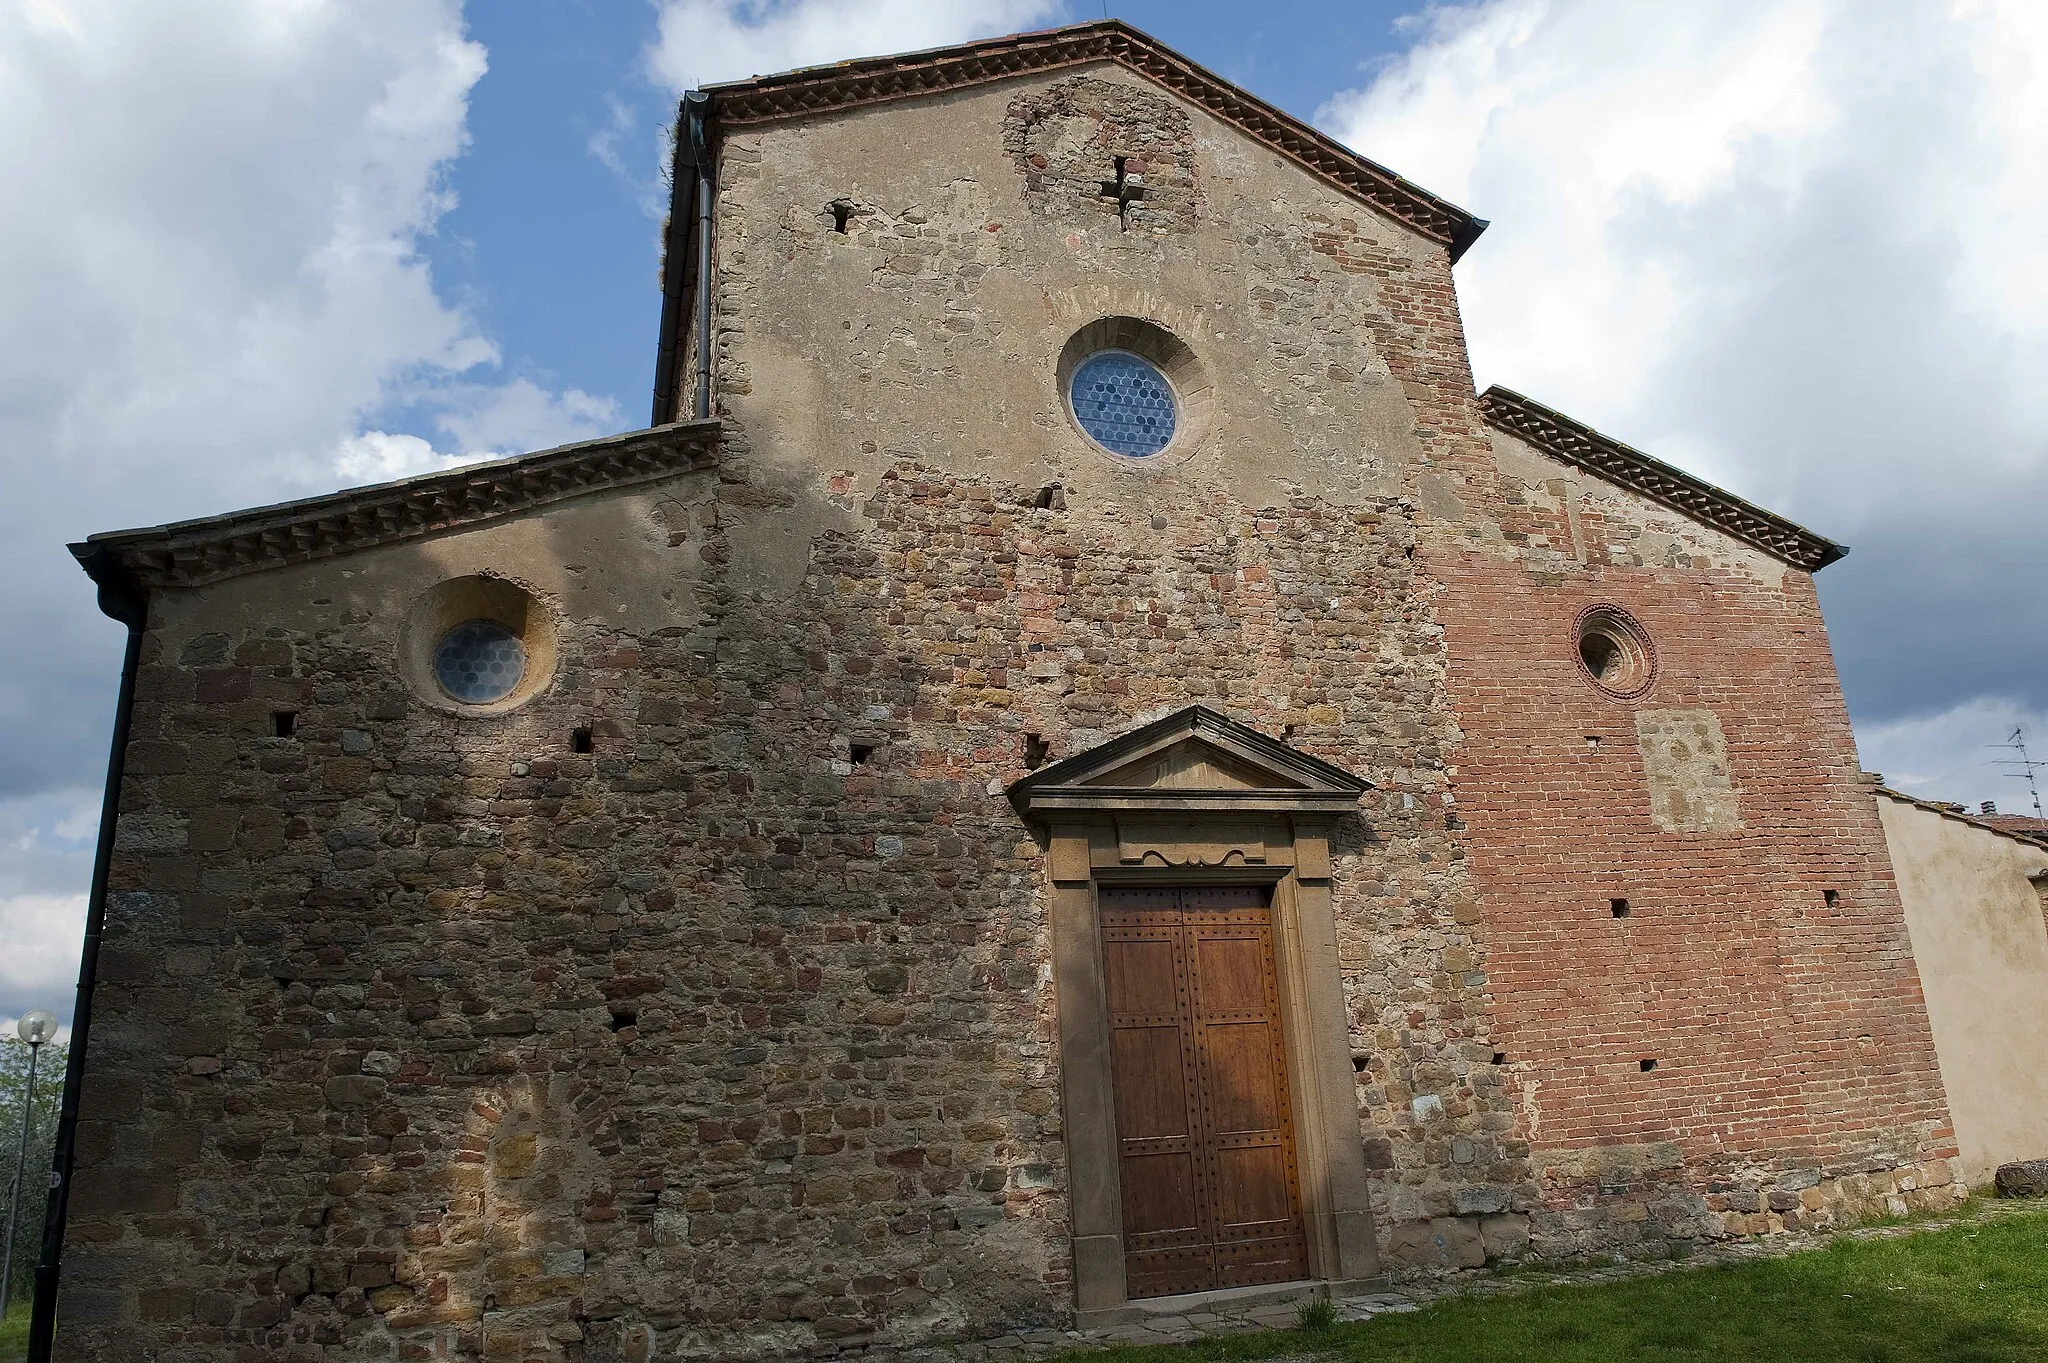 Photo showing: Sant'Appiano

Native name
Pieve di Sant'Appiano Location
Barberino Val d'Elsa, Florence, Tuscany, Italy Coordinates
43° 30′ 47.84″ N, 11° 08′ 48.16″ E Established
990 (Already recorded) Authority file

: Q3904744
institution QS:P195,Q3904744